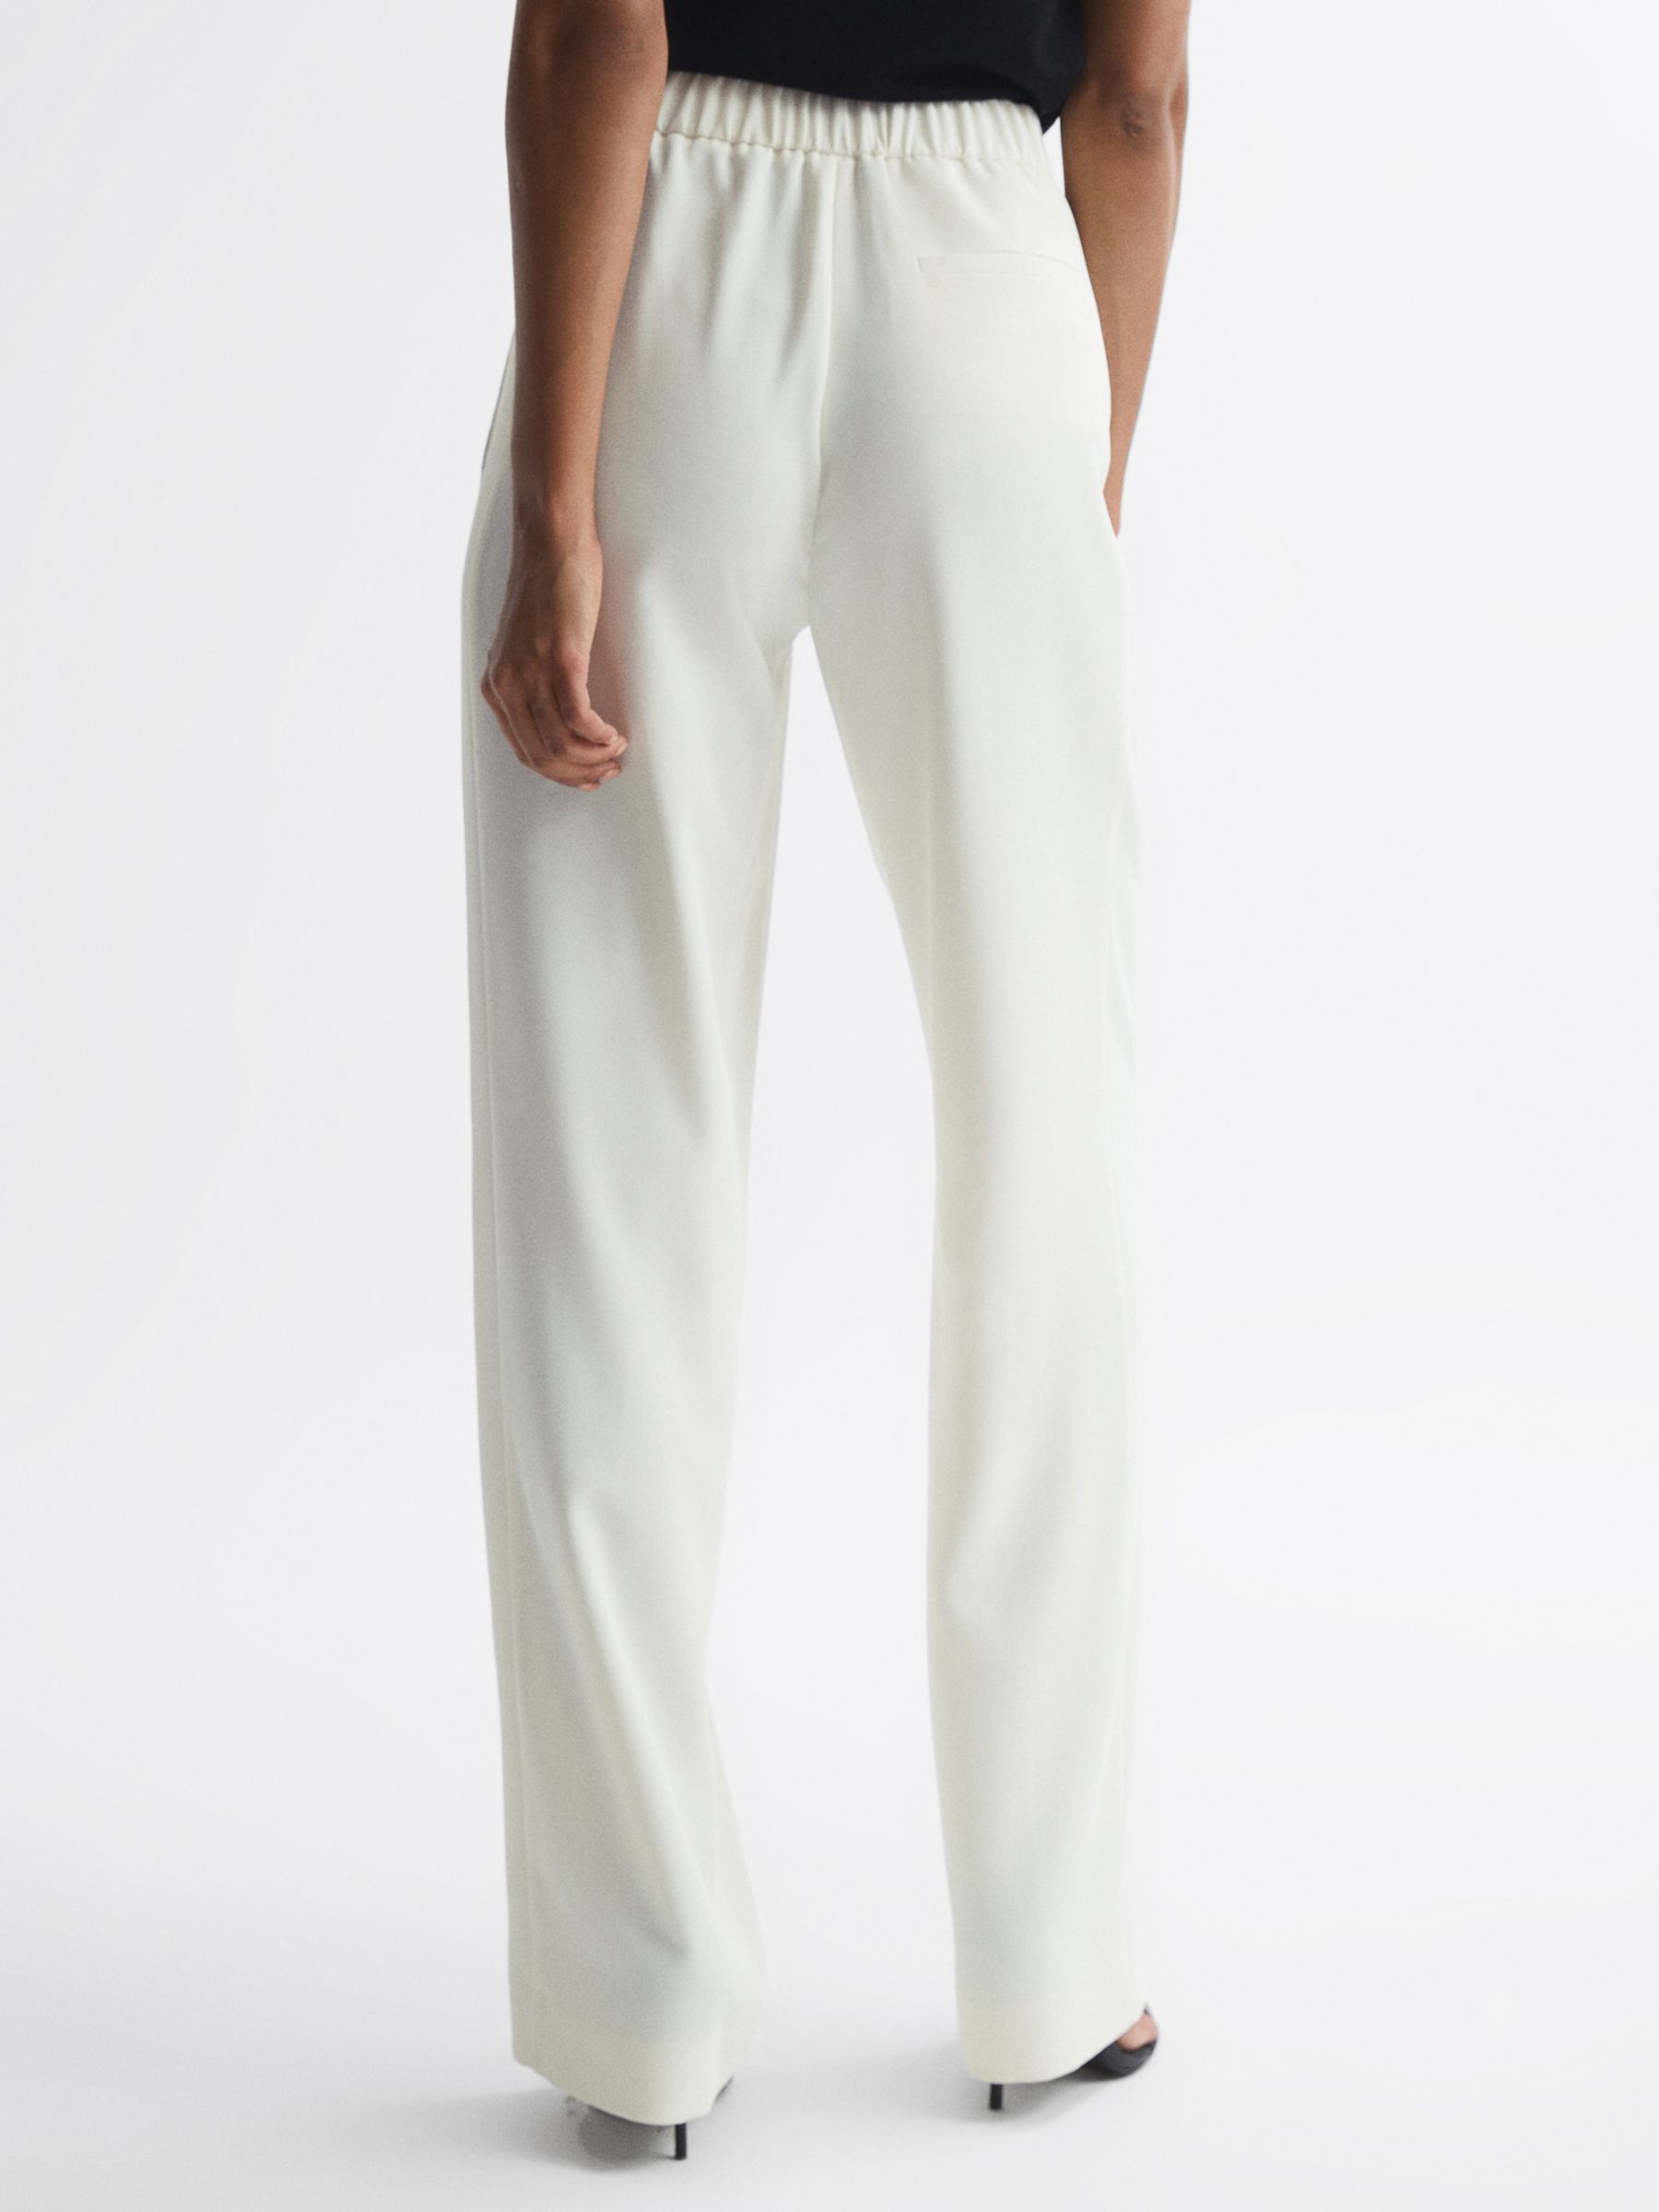 Reiss Aleah Front Pleat Trousers, Cream at John Lewis & Partners